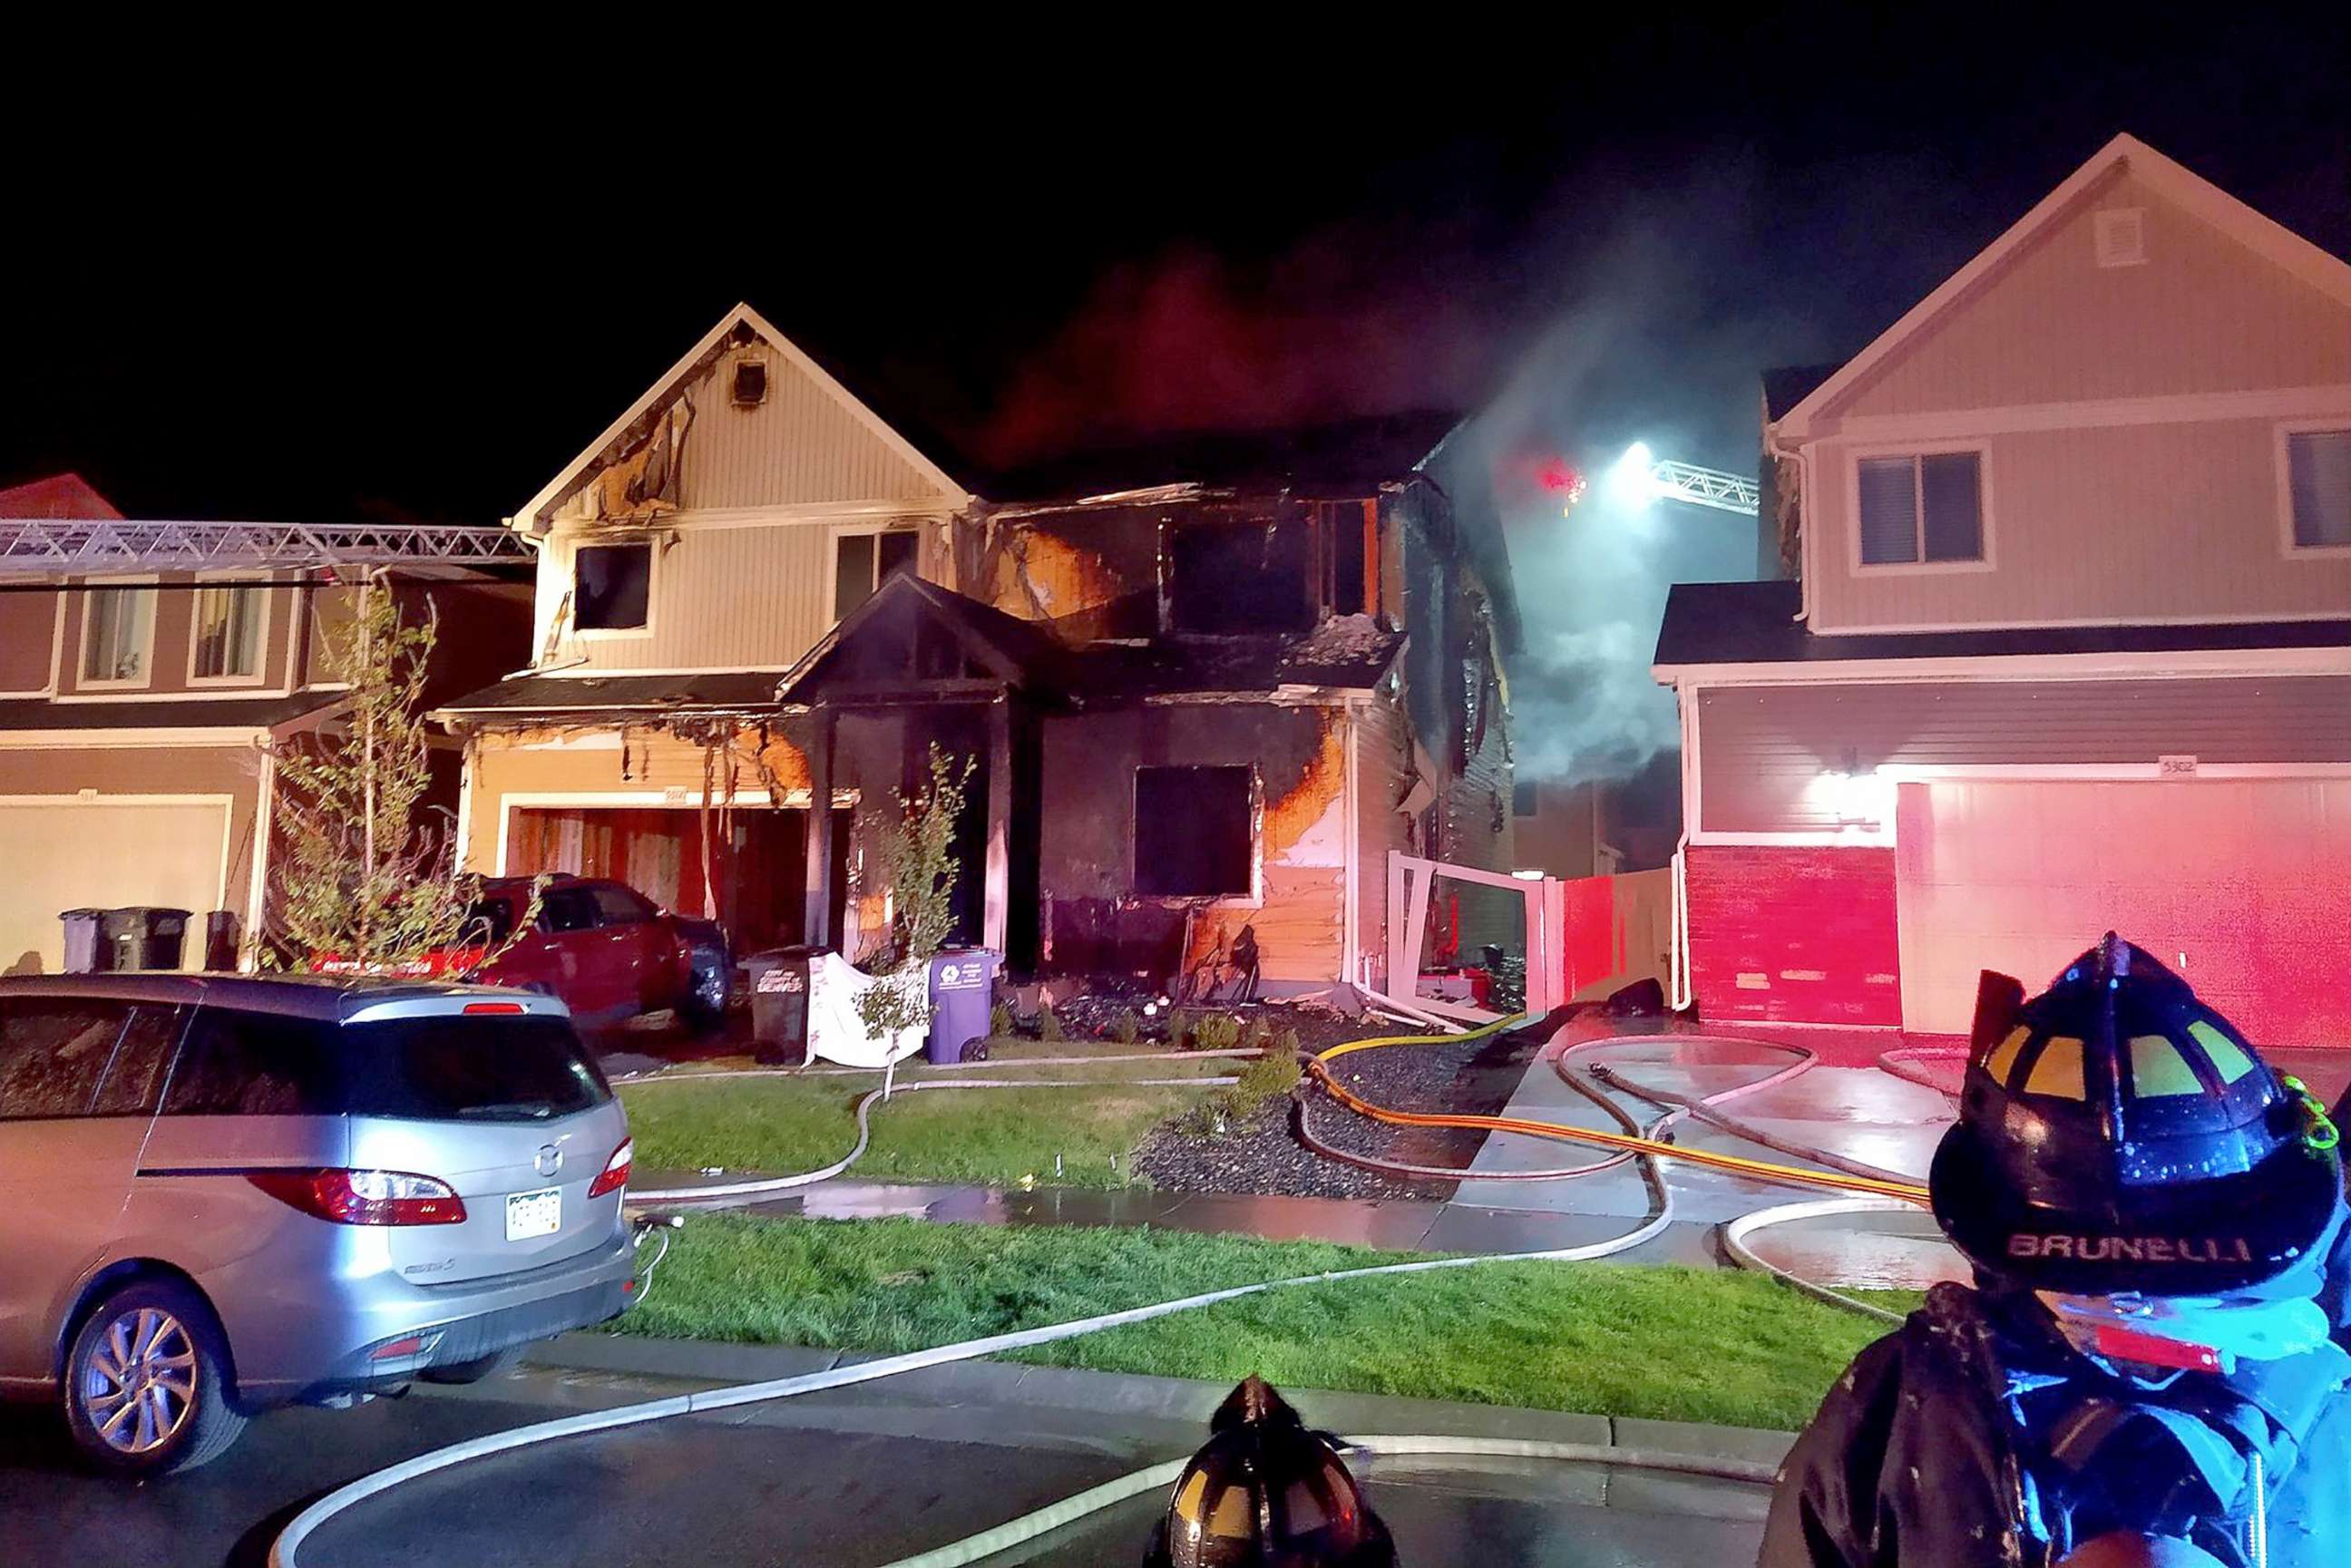 PHOTO: Multiple people were found dead in a house fire that authorities suspect was intentionally set, early Aug. 5, 2020.